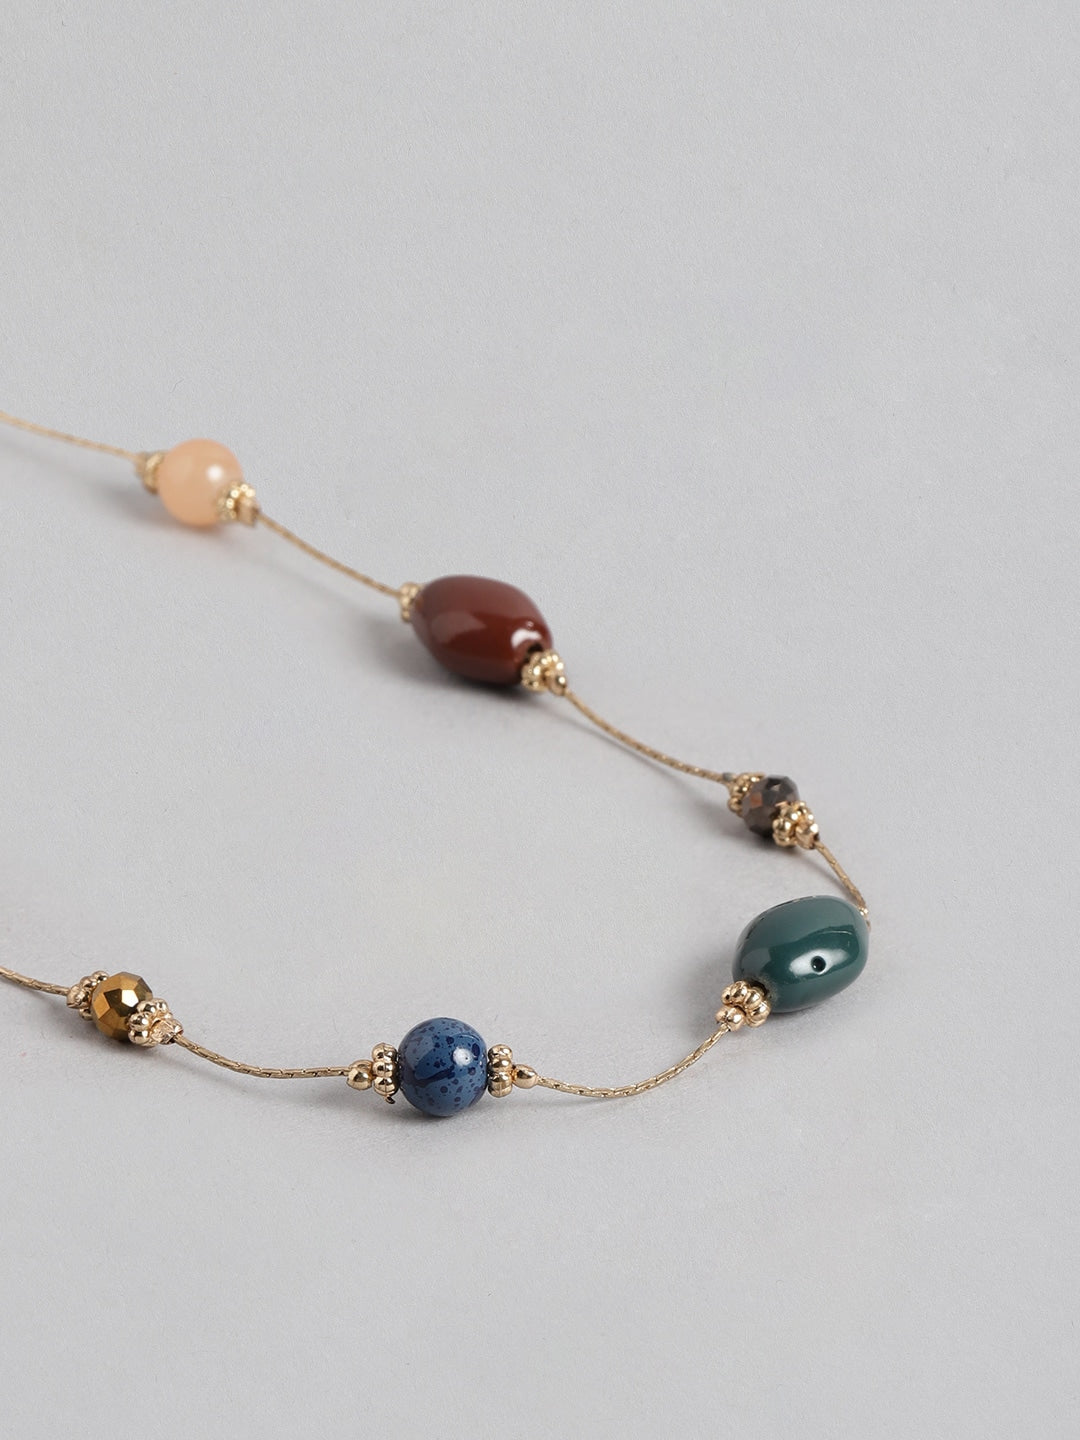 Gold-Toned & Blue Gold-Plated Beaded Necklace